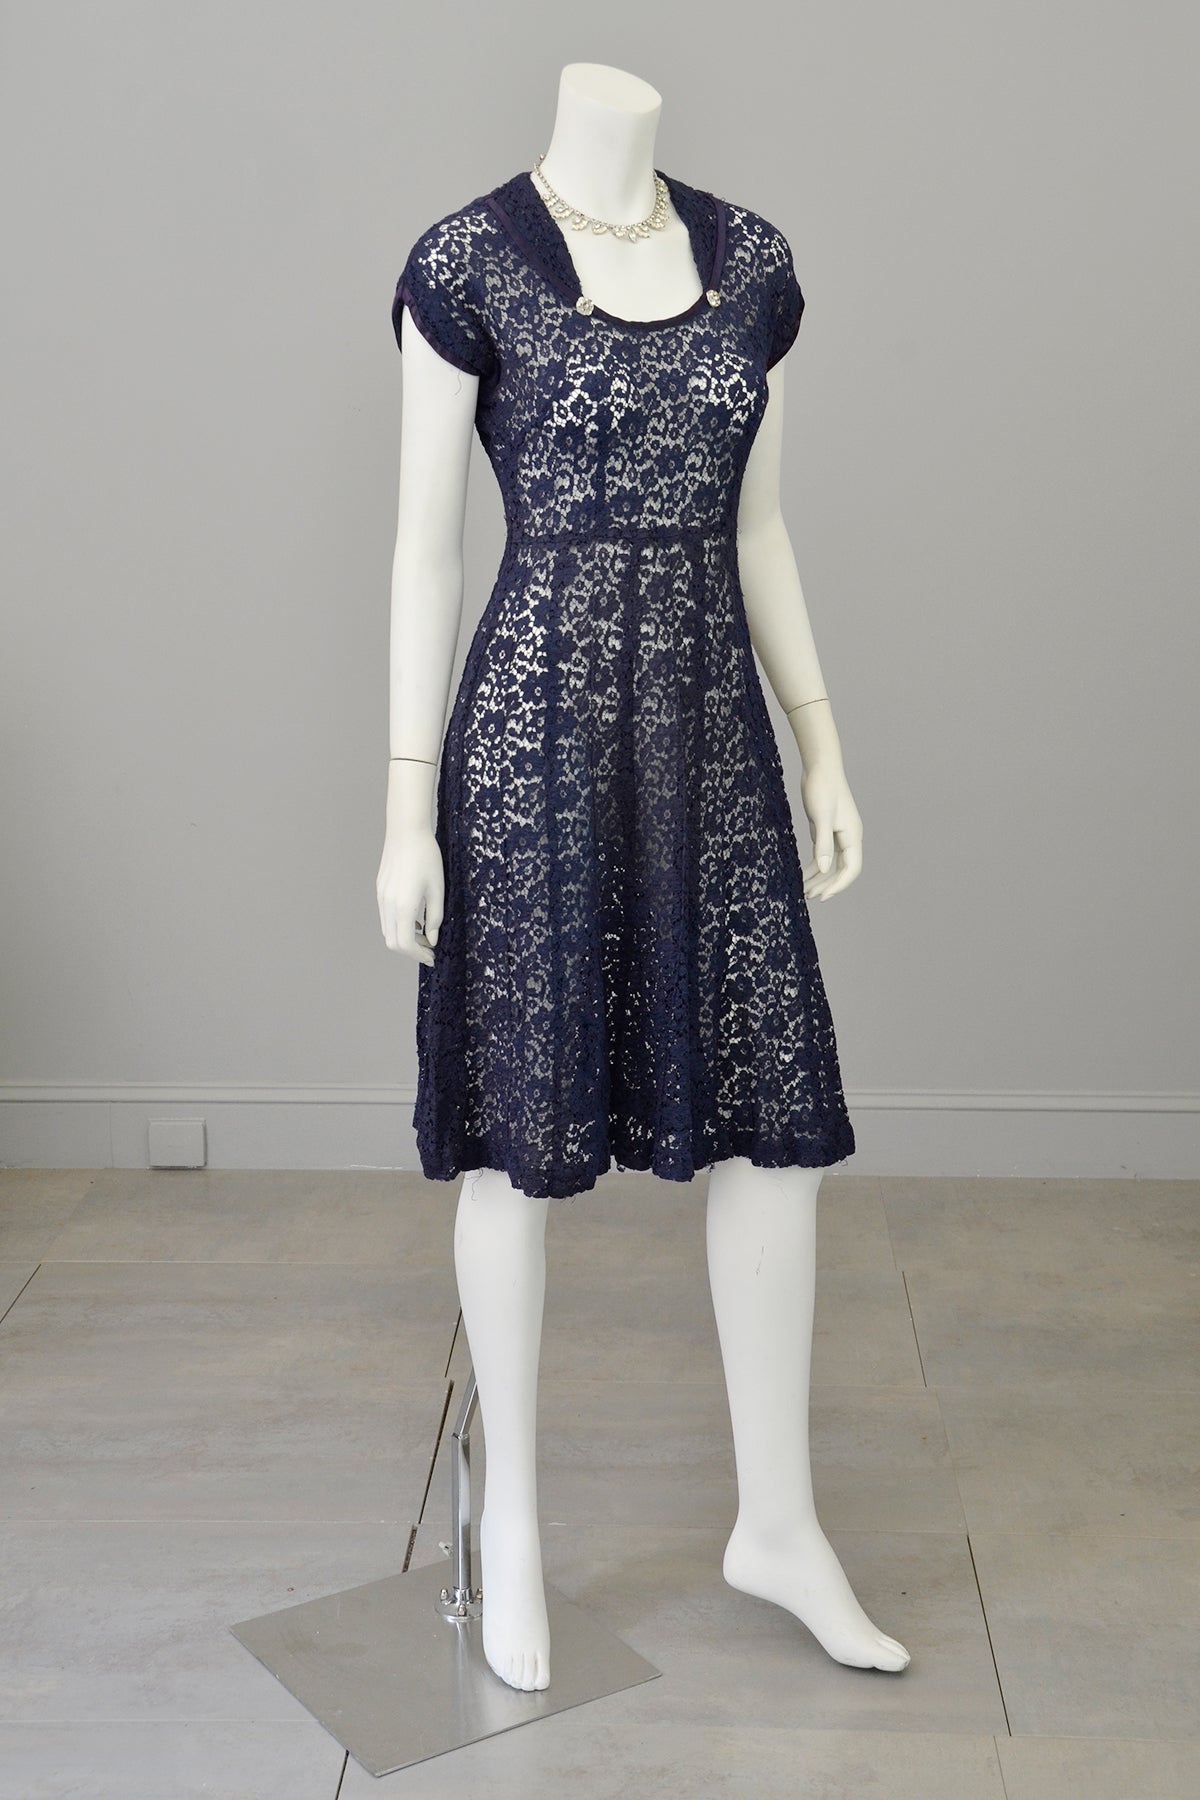 1940s Navy Blue Embroidered Lace Dress